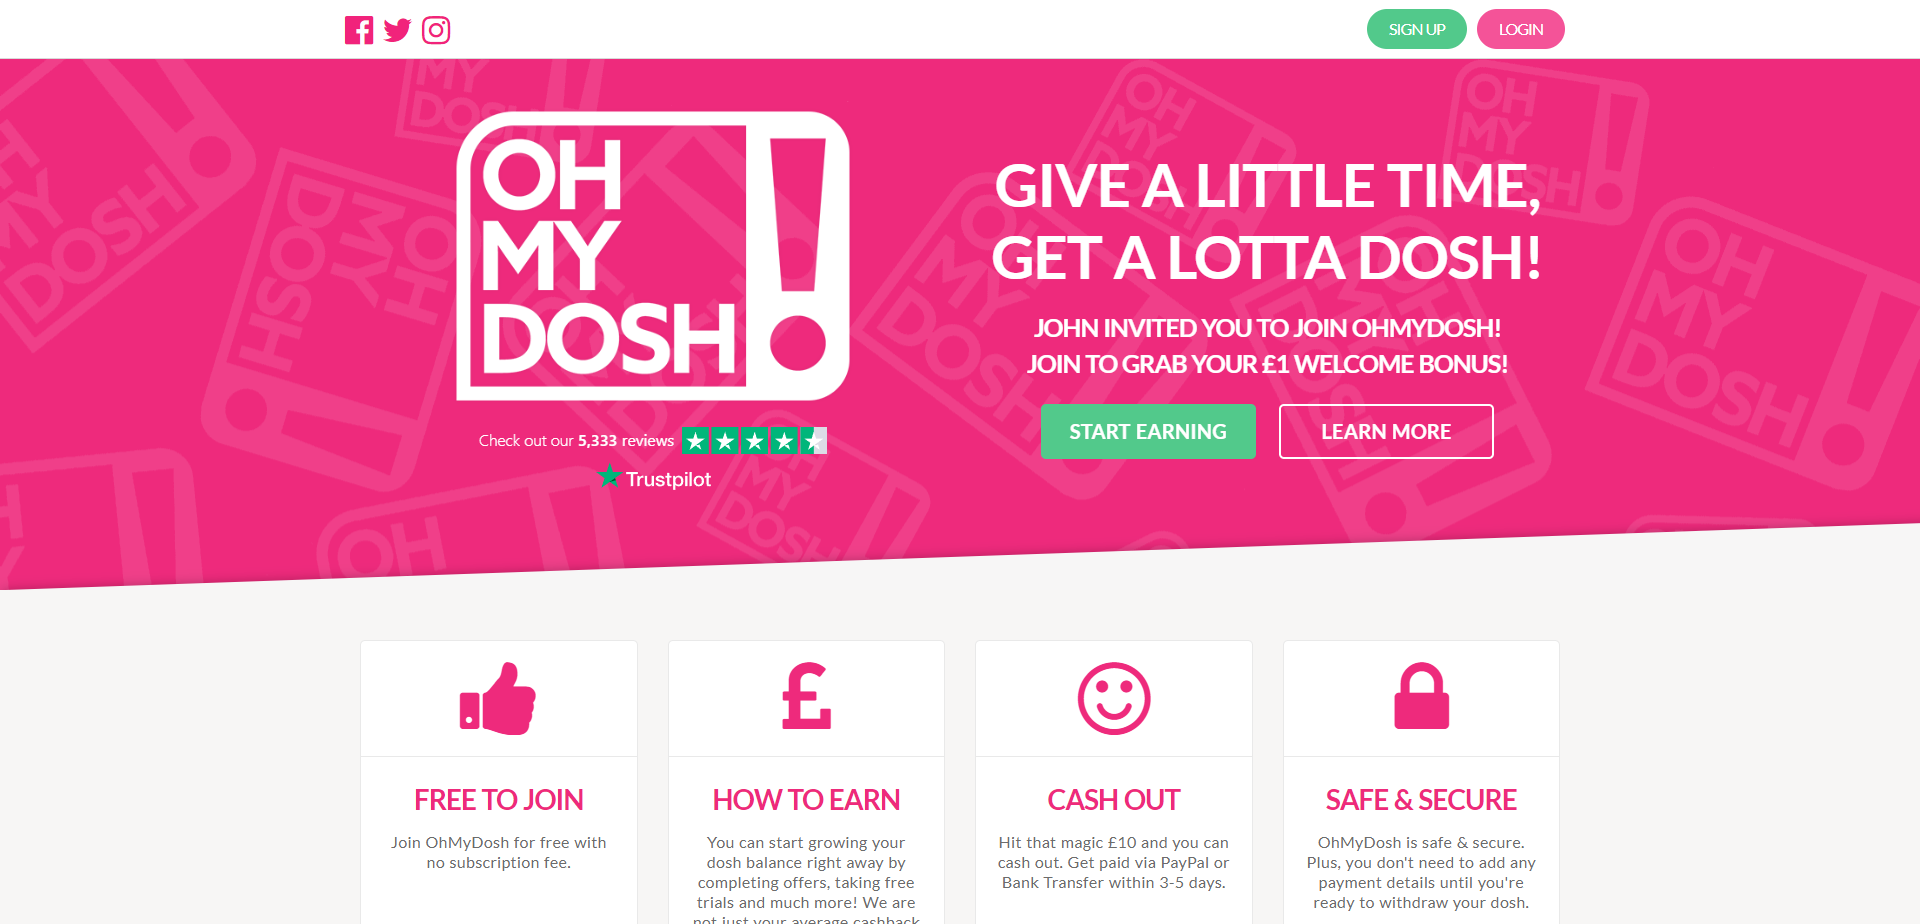 Referral Landing Page for OhMyDosh